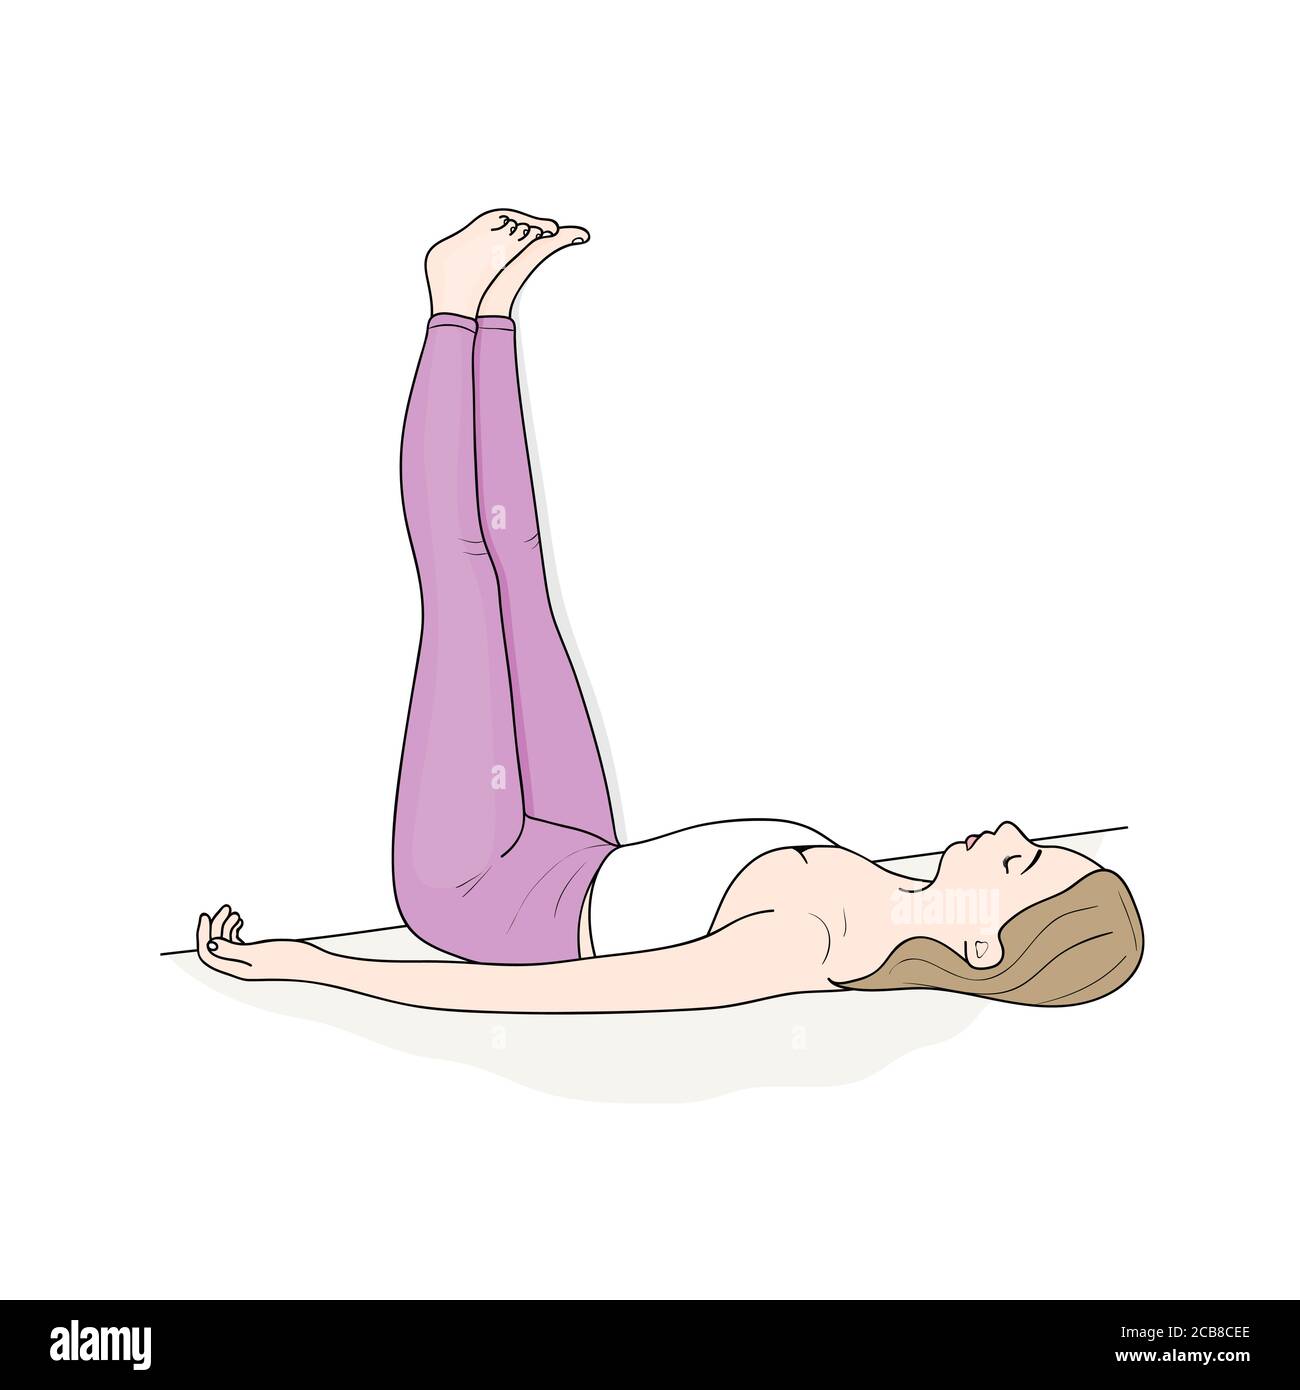 Benefits of Legs Up the Wall Pose - Shannon Connell